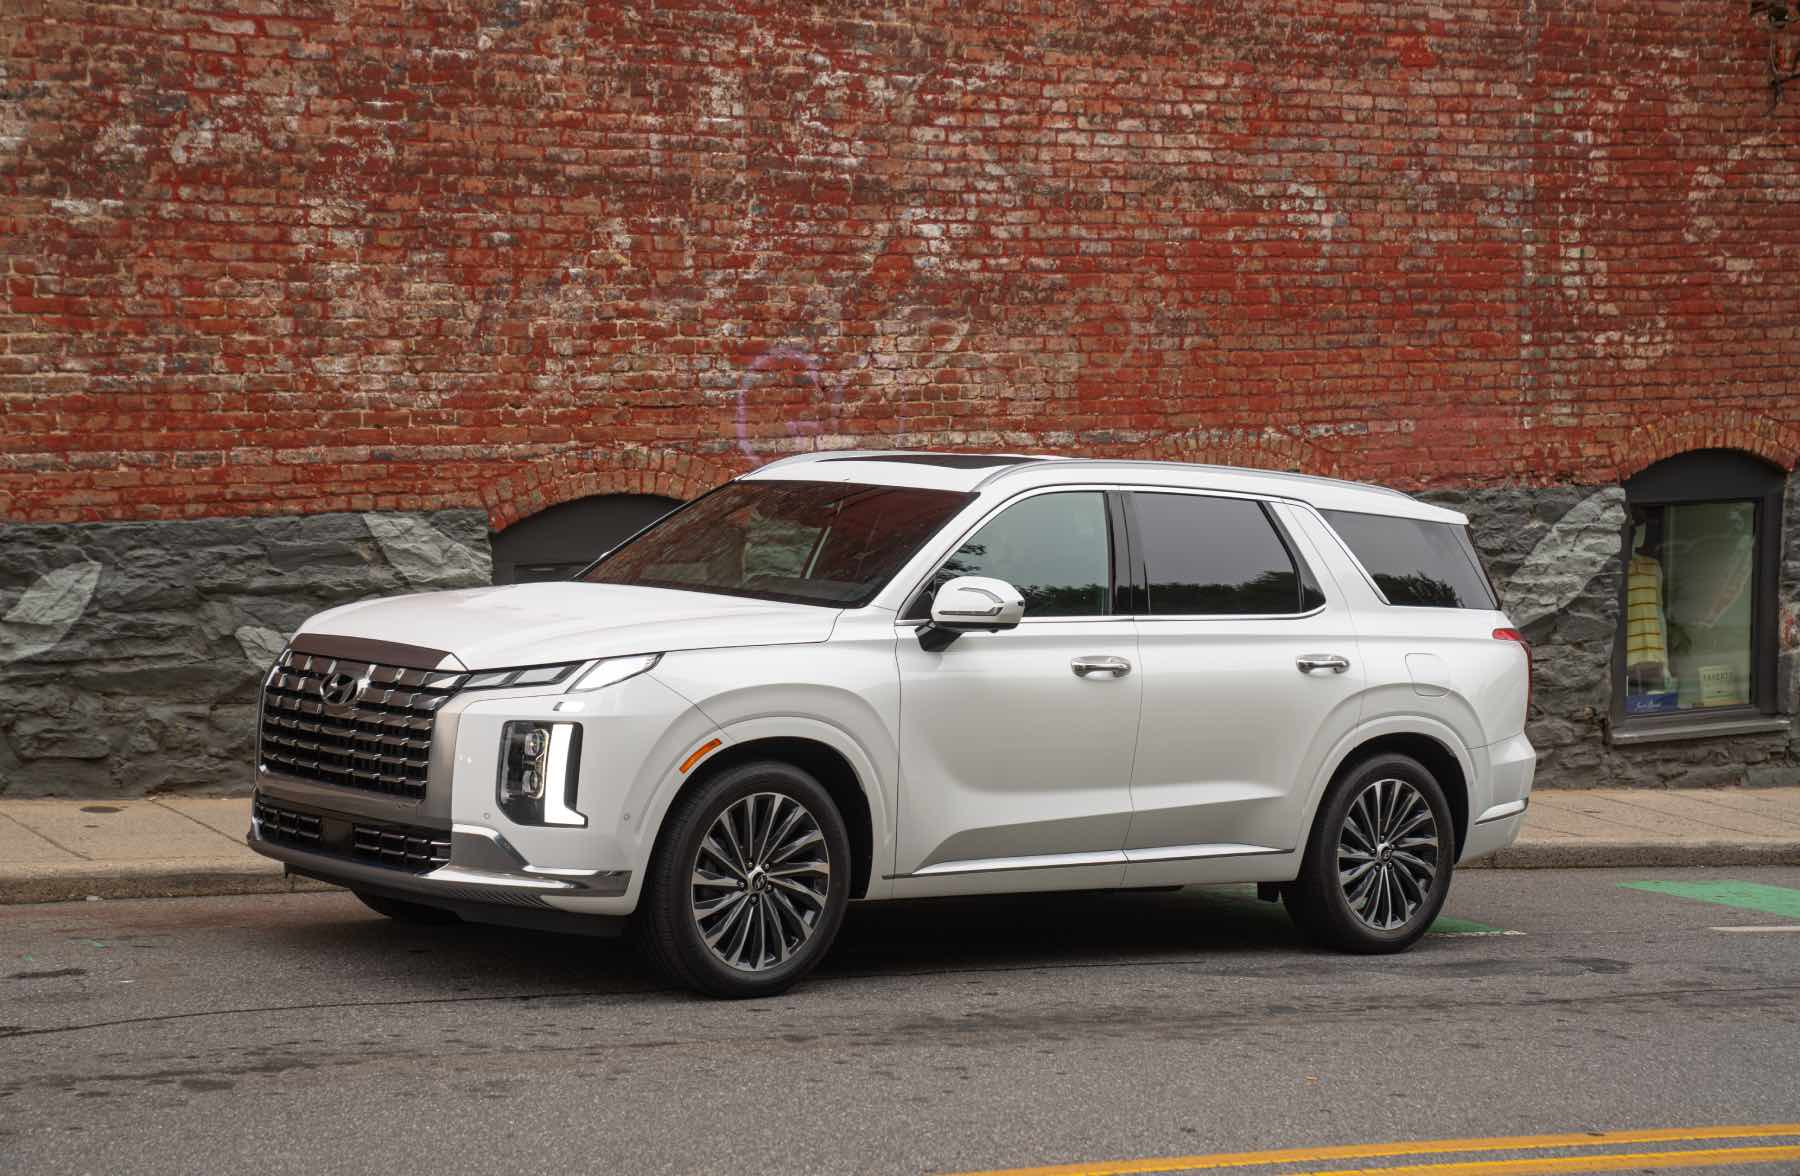 The Hyundai Palisade earned a ranking as the best 3rd row SUV for the money in 2023.